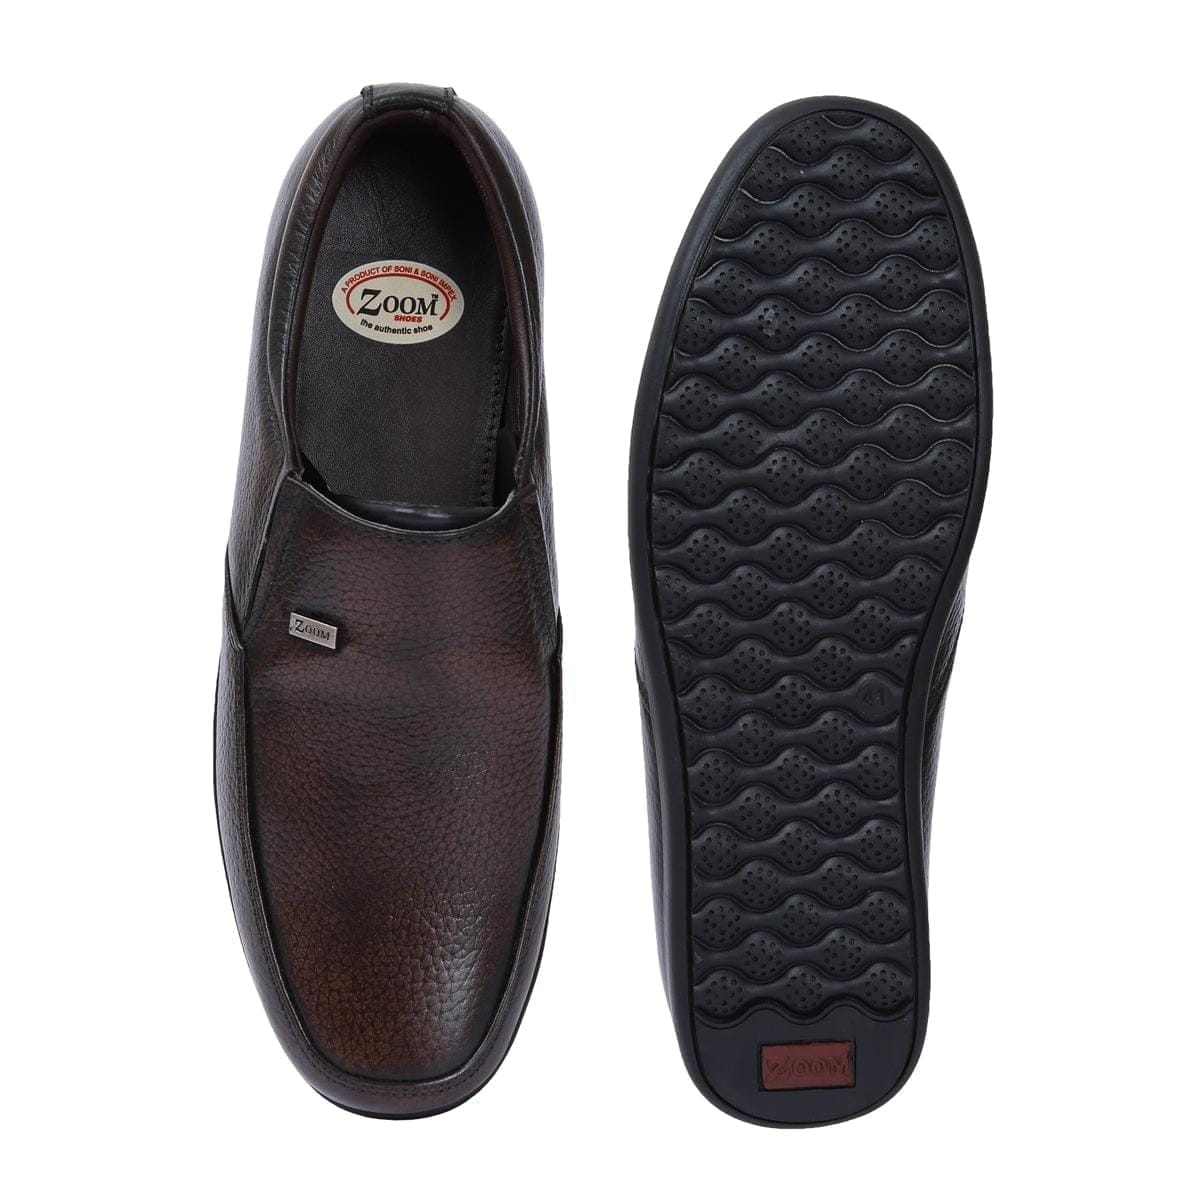 Men’s Leather Slip On Loafers 